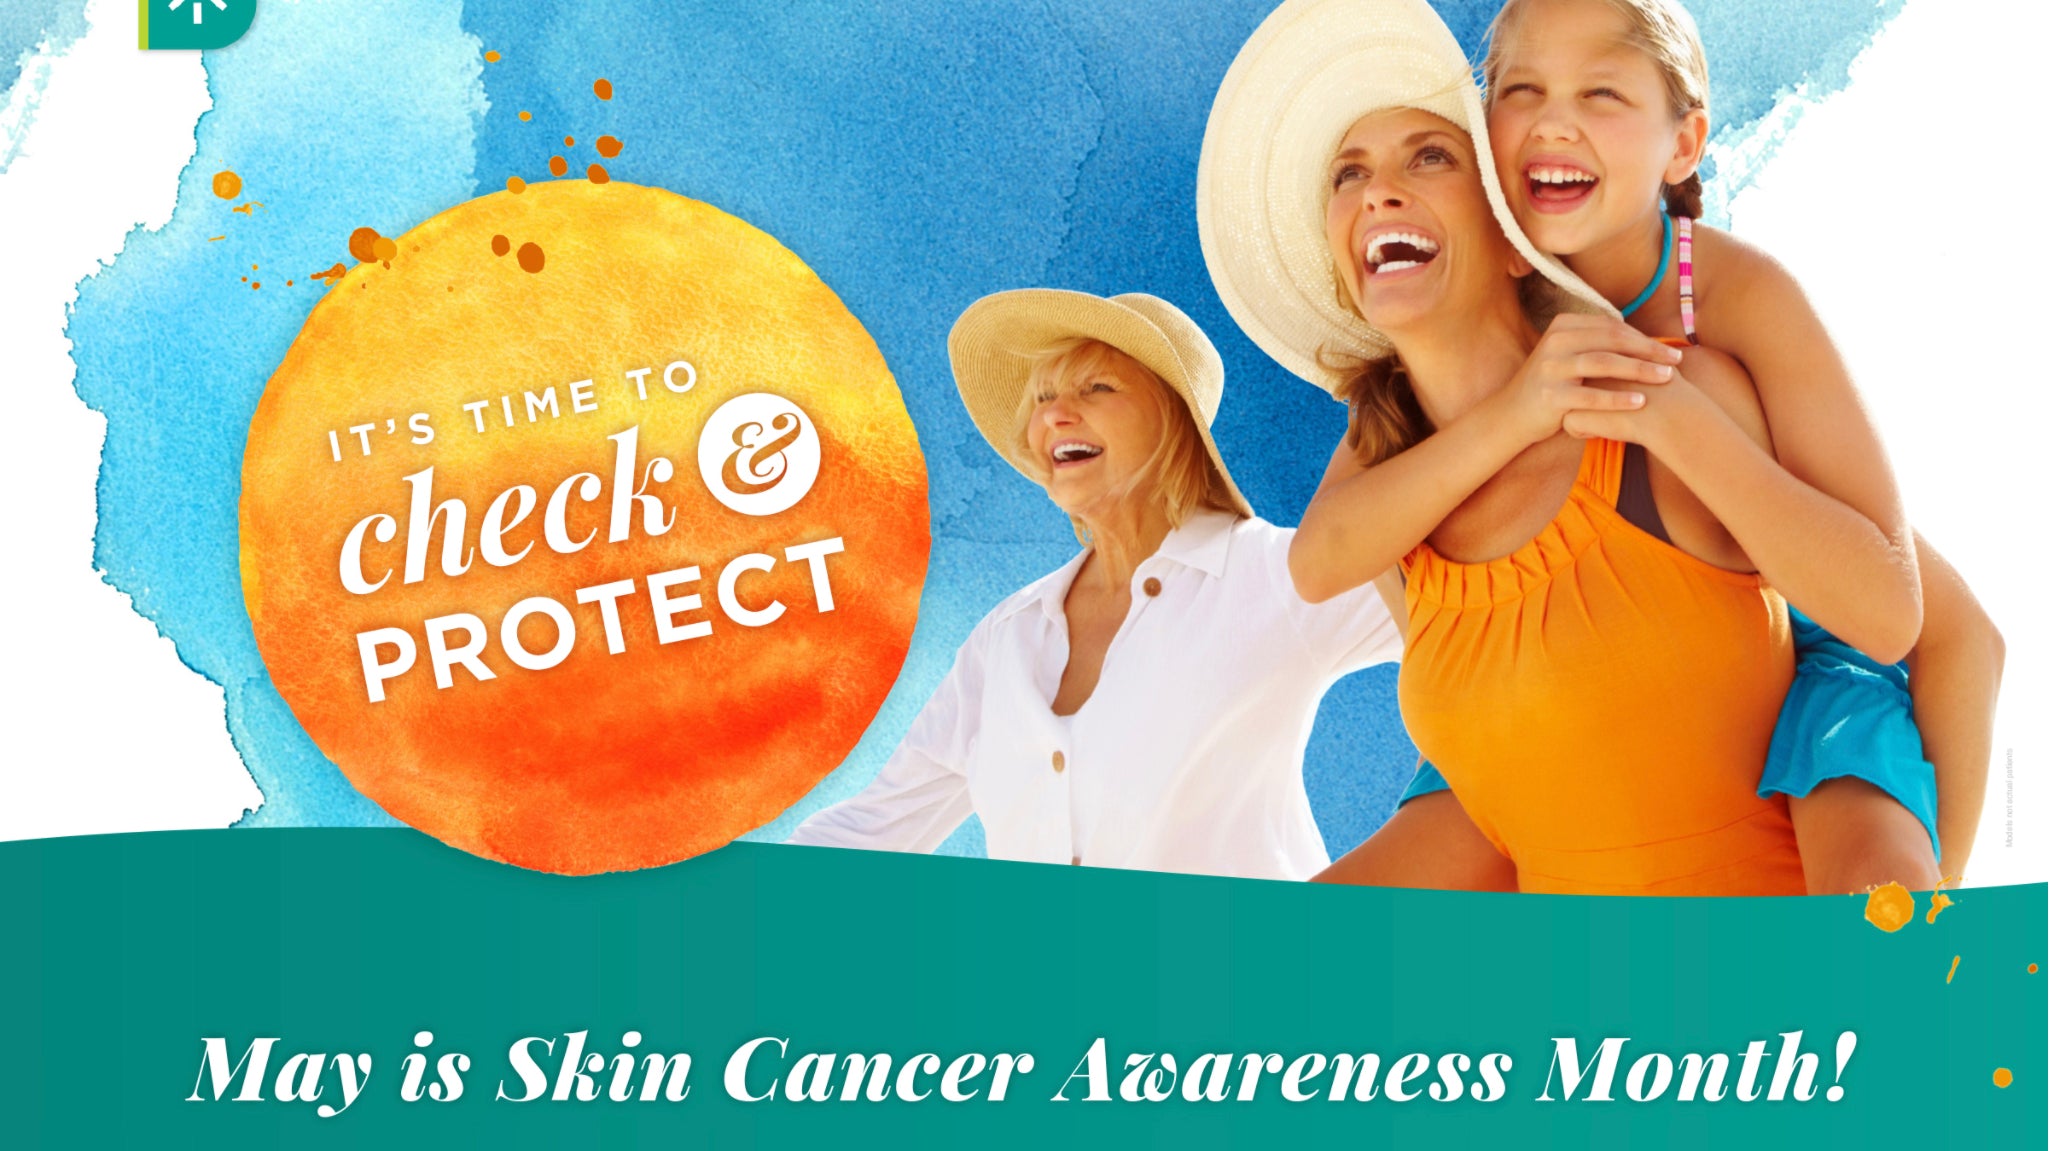 Check & Protect During Skin Cancer Awareness Month! ☀️